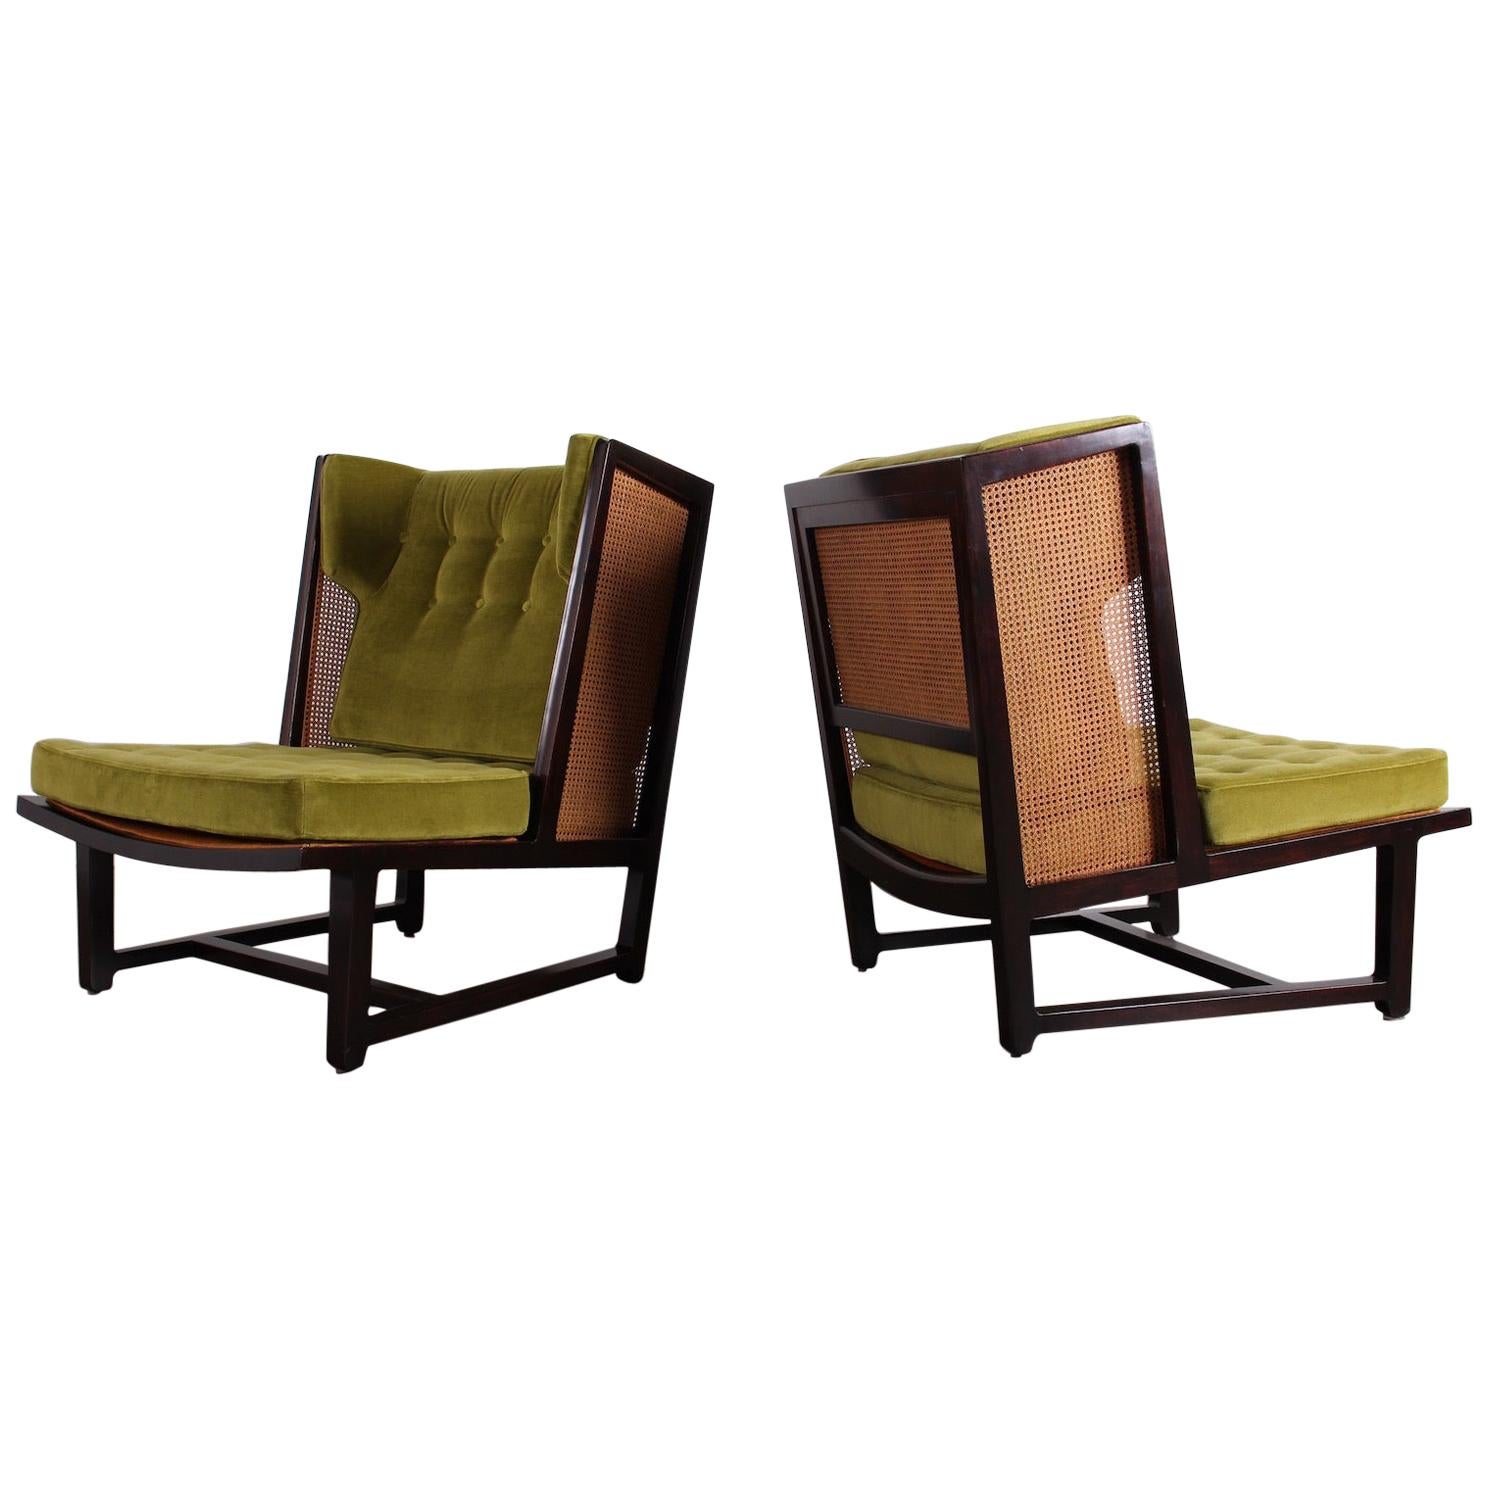 Pair of Cane Back Wing Chairs by Edward Wormley for Dunbar